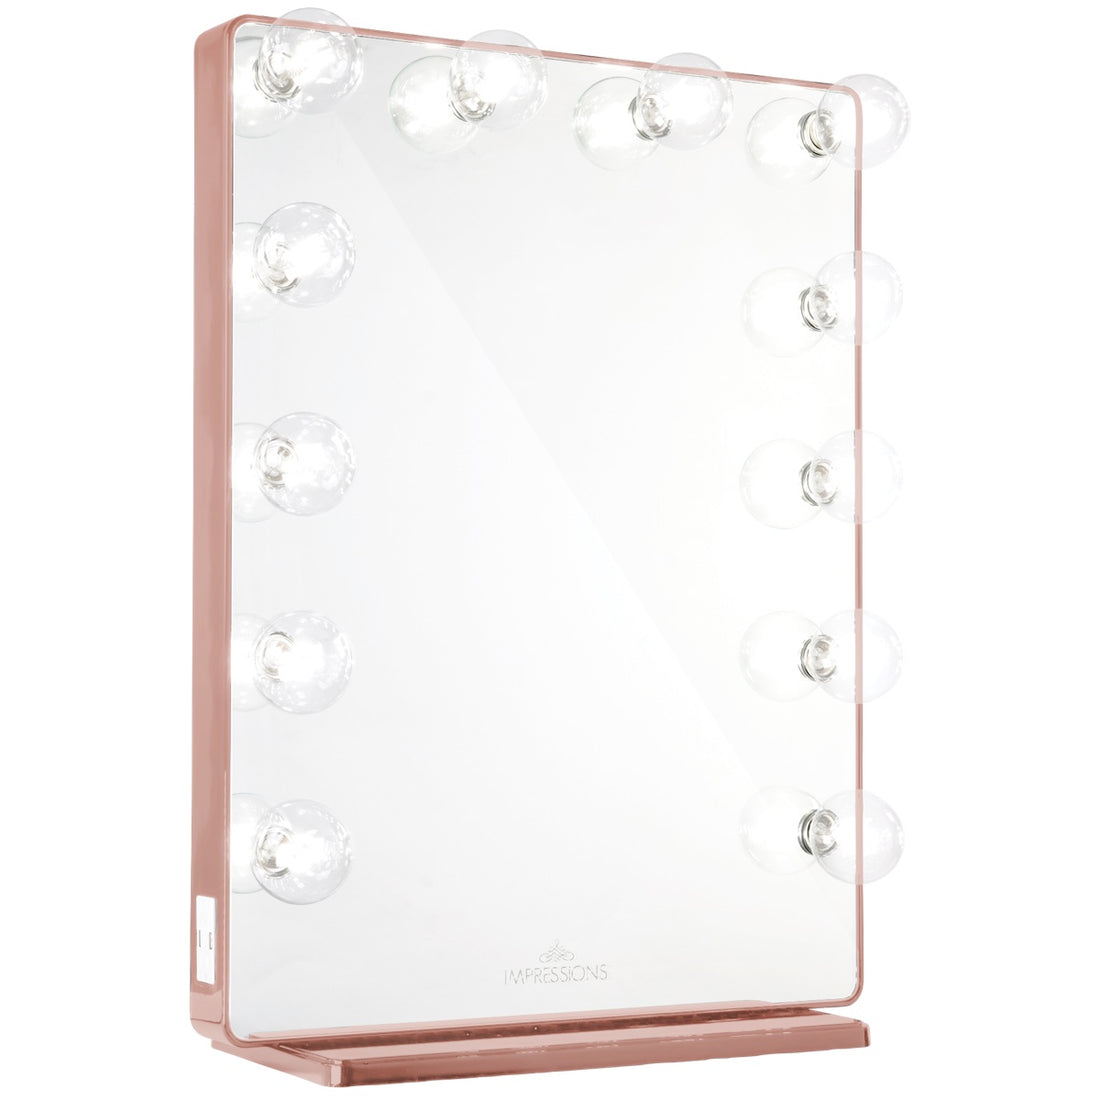 Impressions Hollywood Glow XL 2.0 Vanity Mirror in Rose Gold with Clear LED